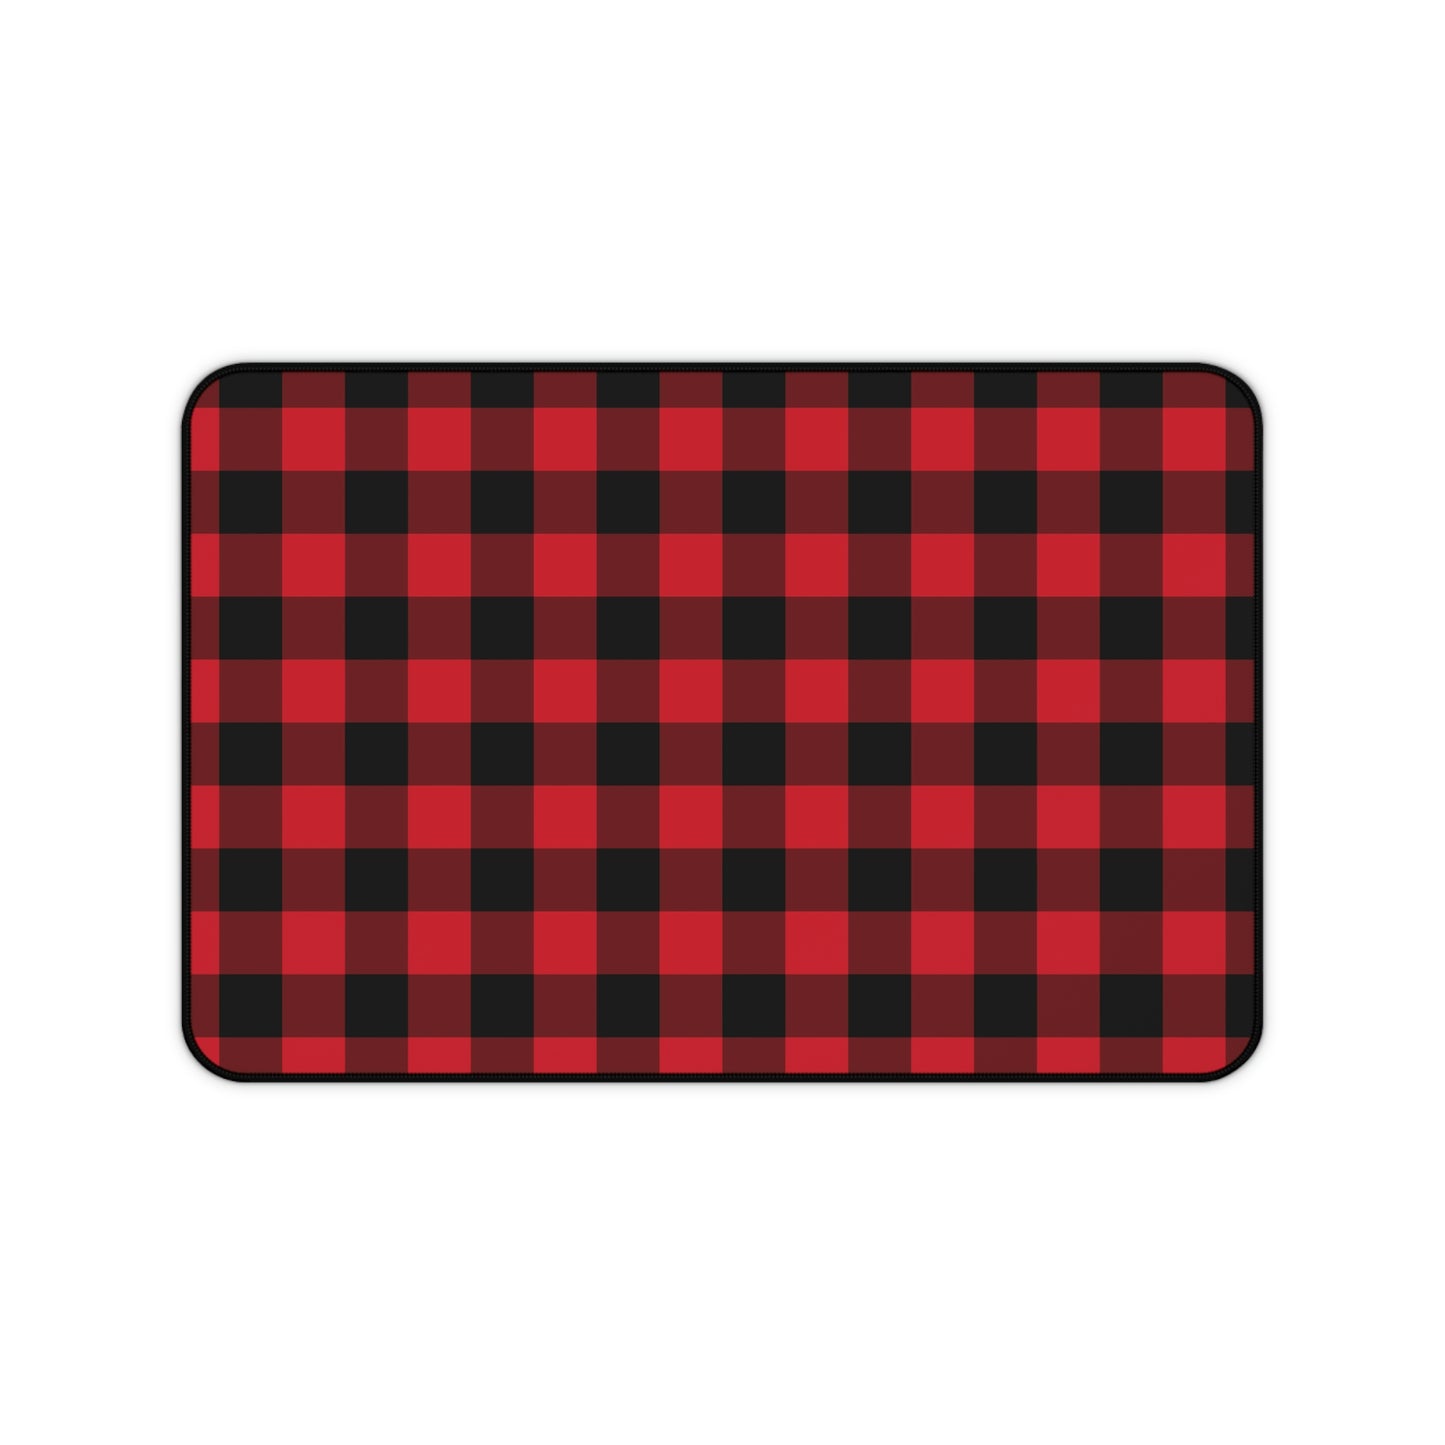 Red Black Buffalo Plaid Desk Mat, Check Checkered Holiday Large Small Wide Gaming Keyboard Mouse Unique Laptop Pad